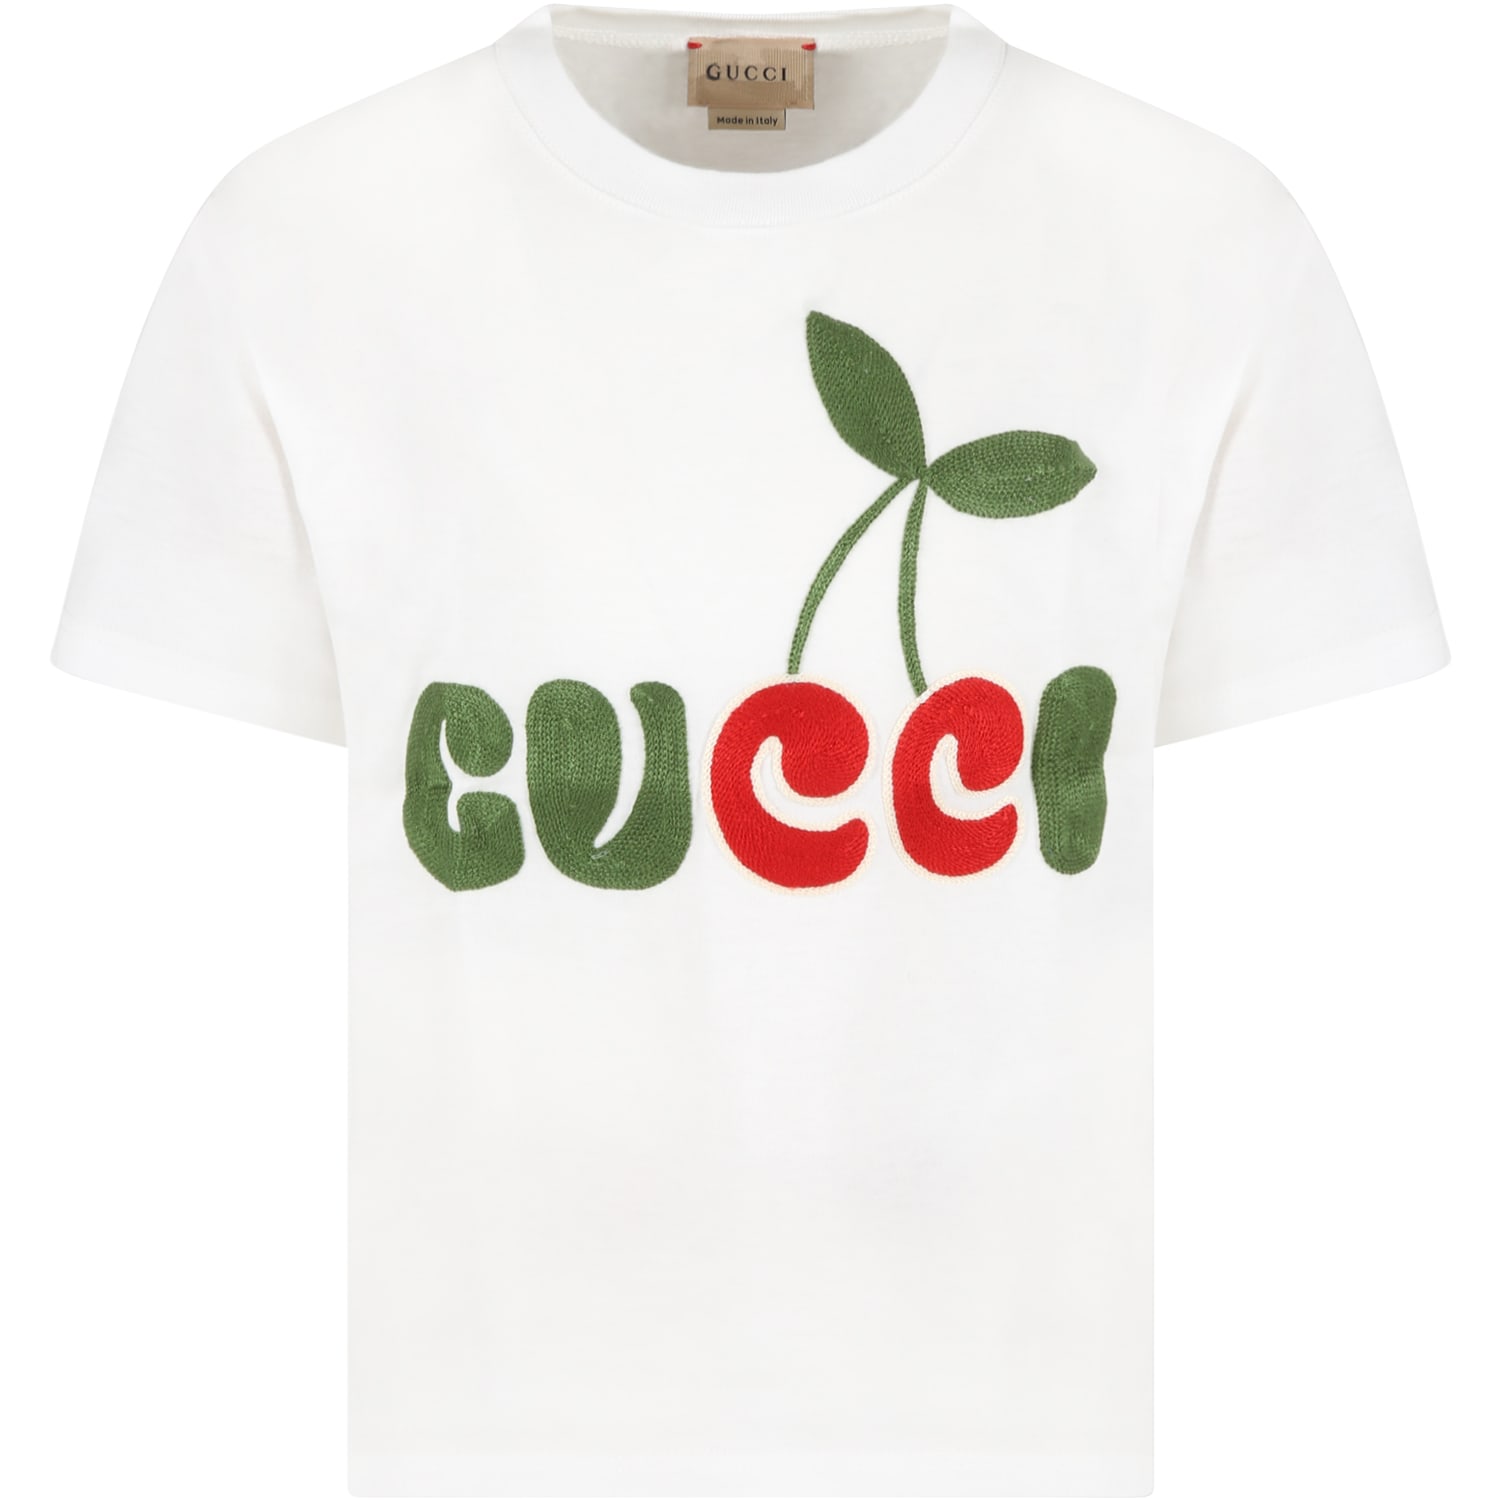 Gucci White T-shirt For Kids With Cherry